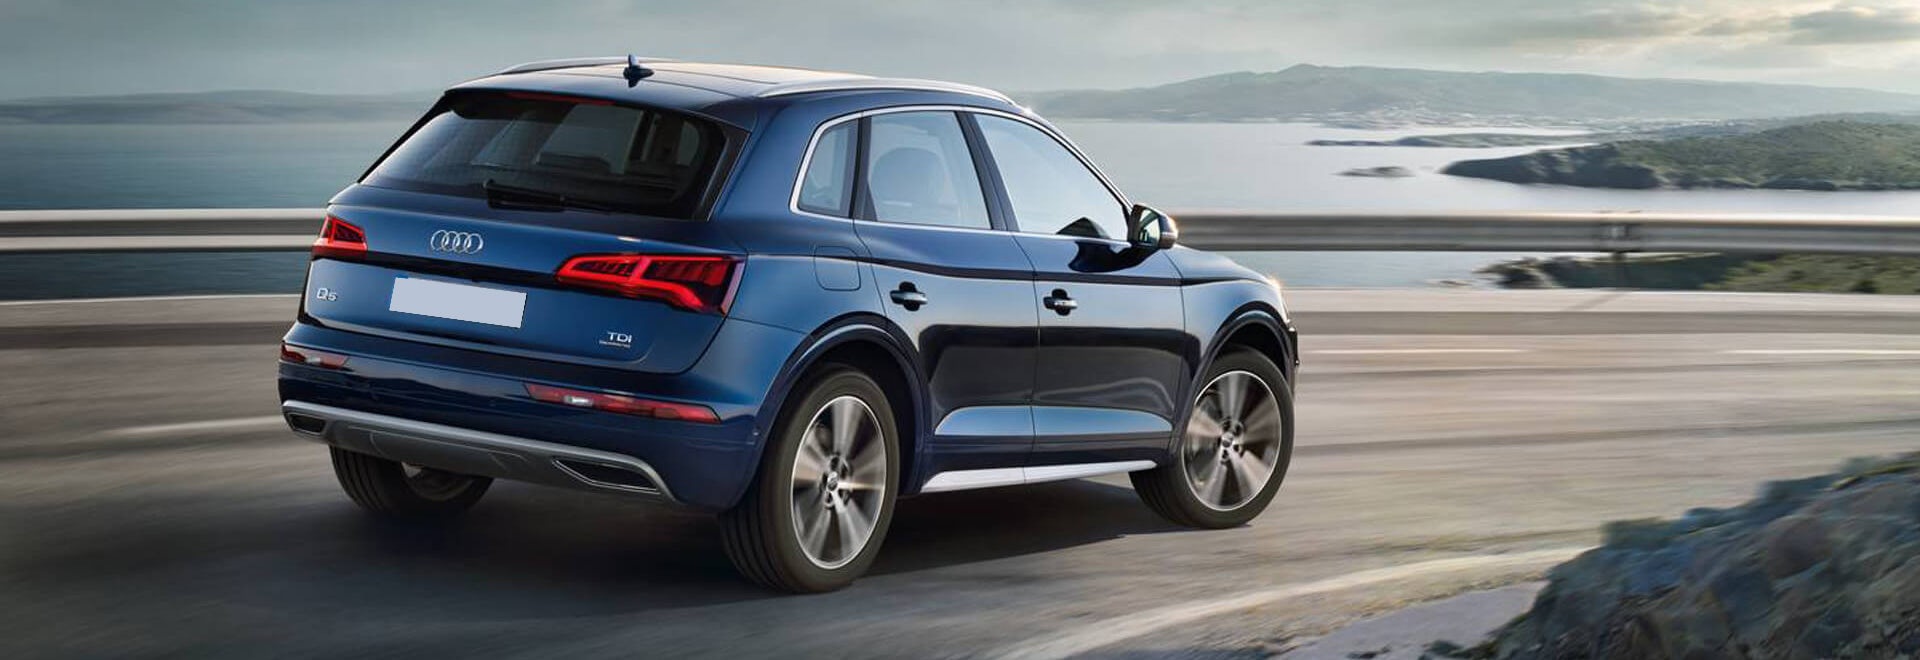 Audi Q5 dimensions guide - UK exterior and interior sizes | carwow